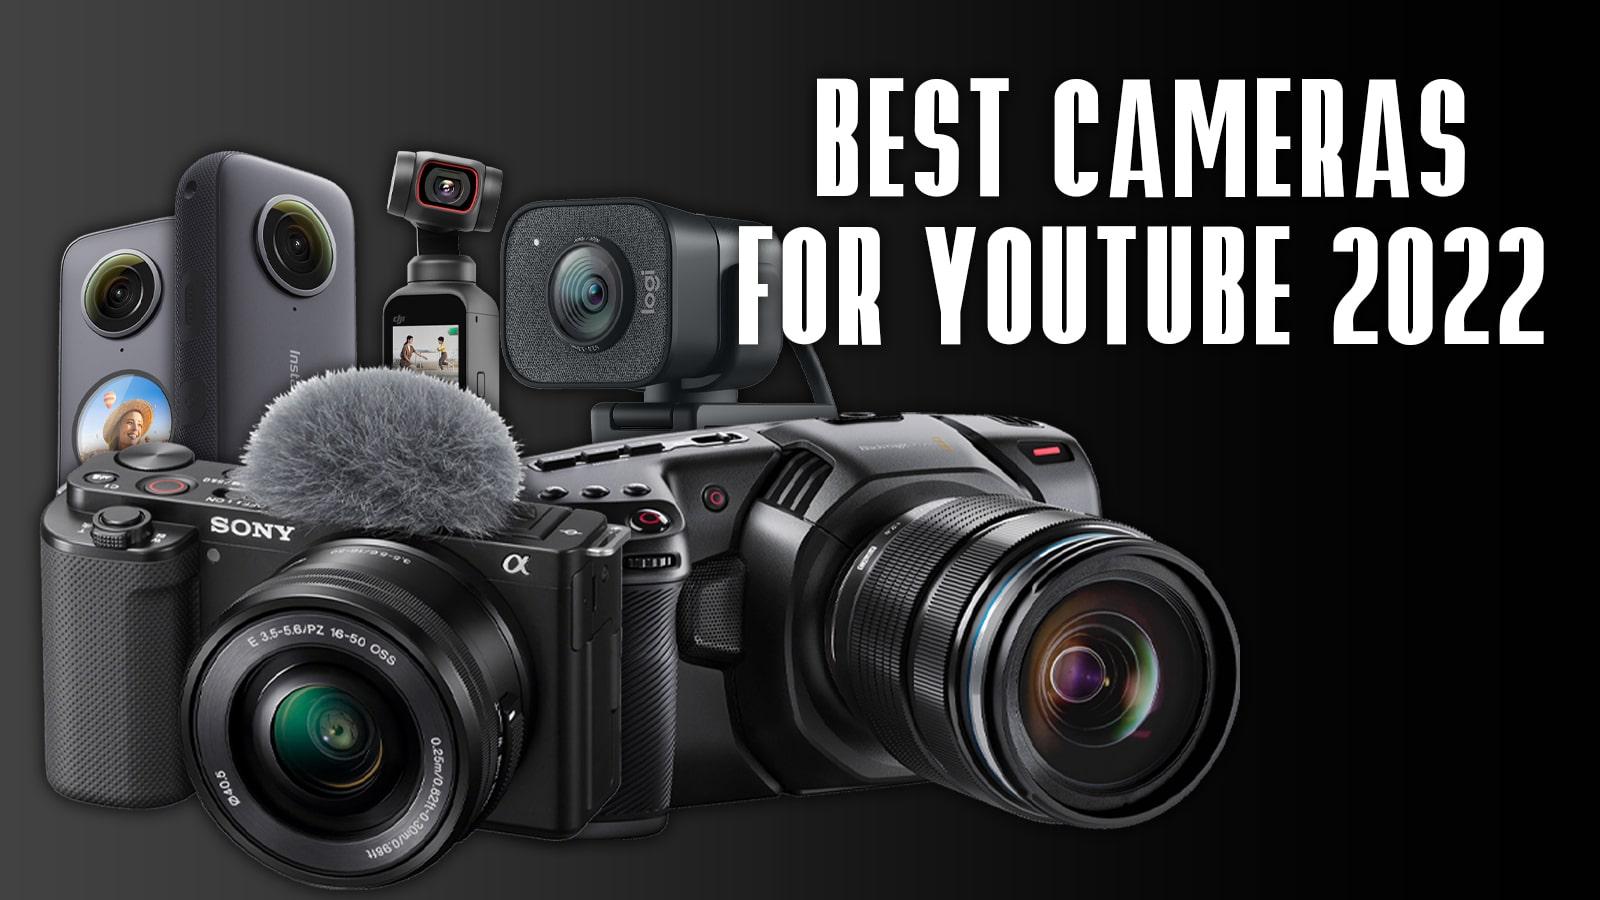 BEST CAMERAS FOR YOUTUBE TEMP FEATURED IMAGE